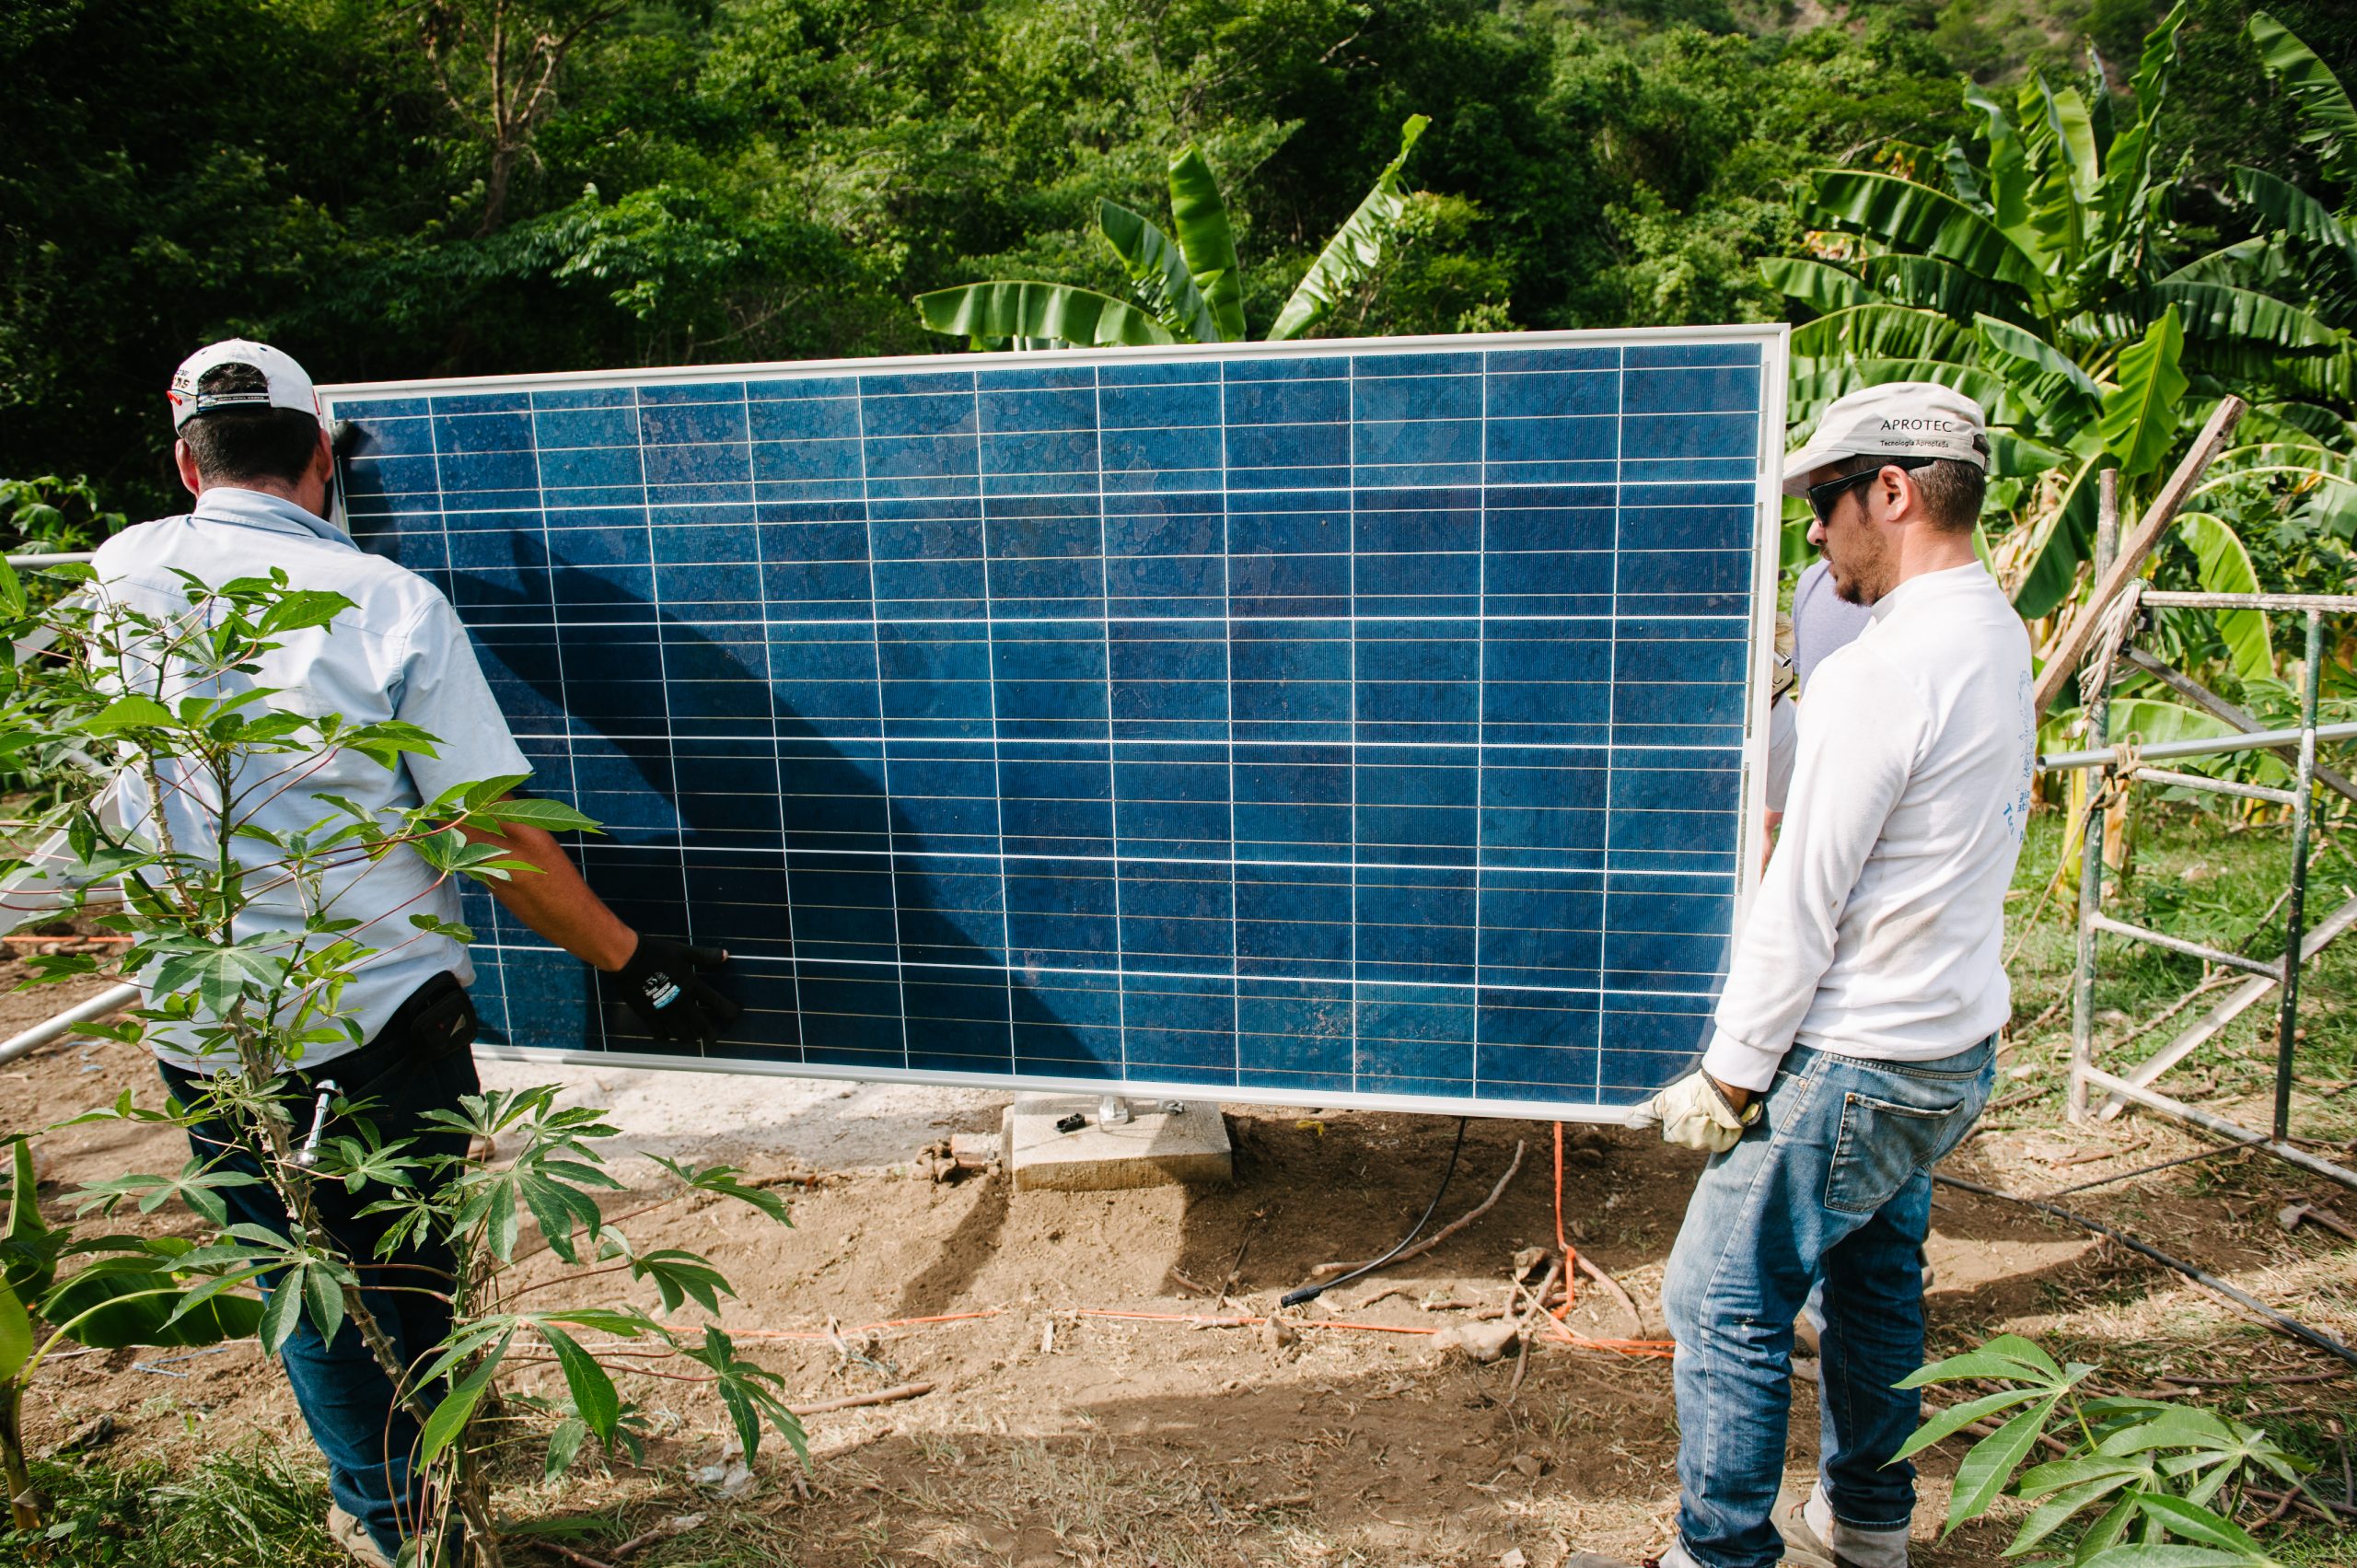 Two people carry a solar panel; solar energy offers solutions to energy poverty for rural communities